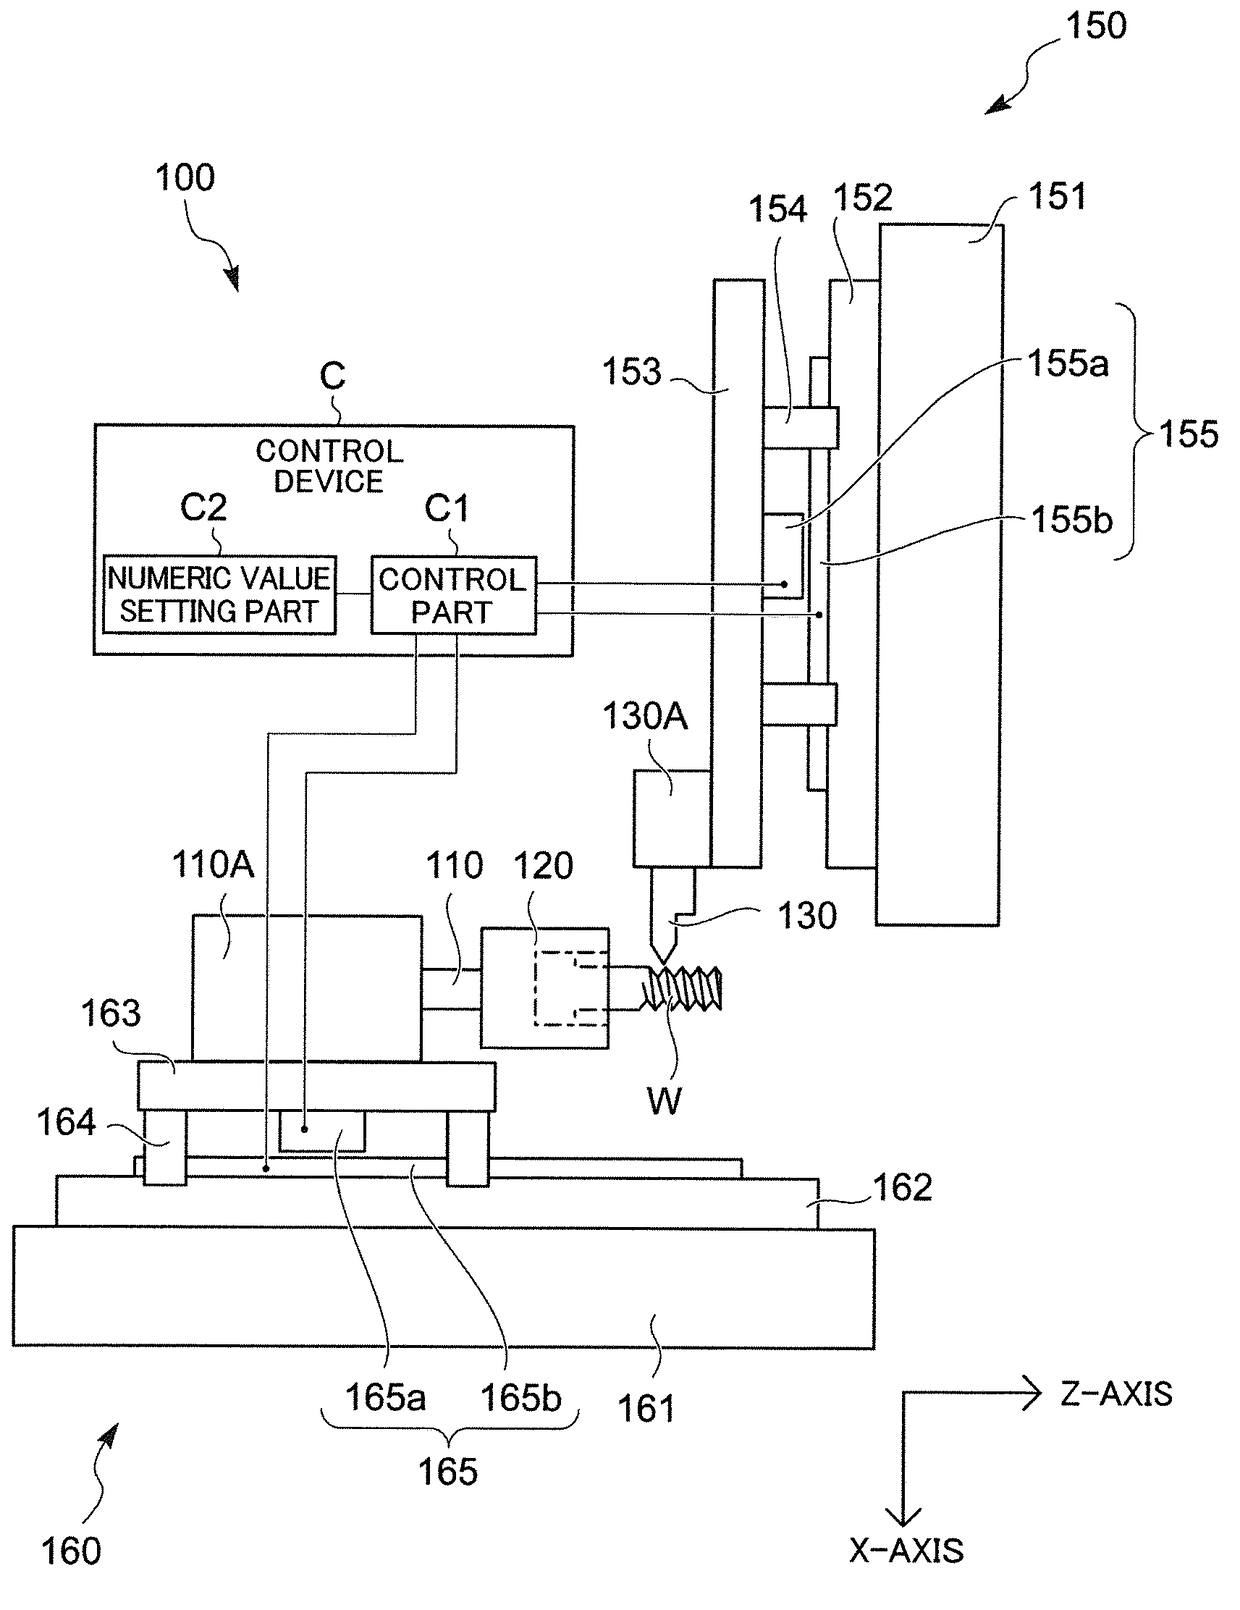 Machine tool and control device of the machine tool